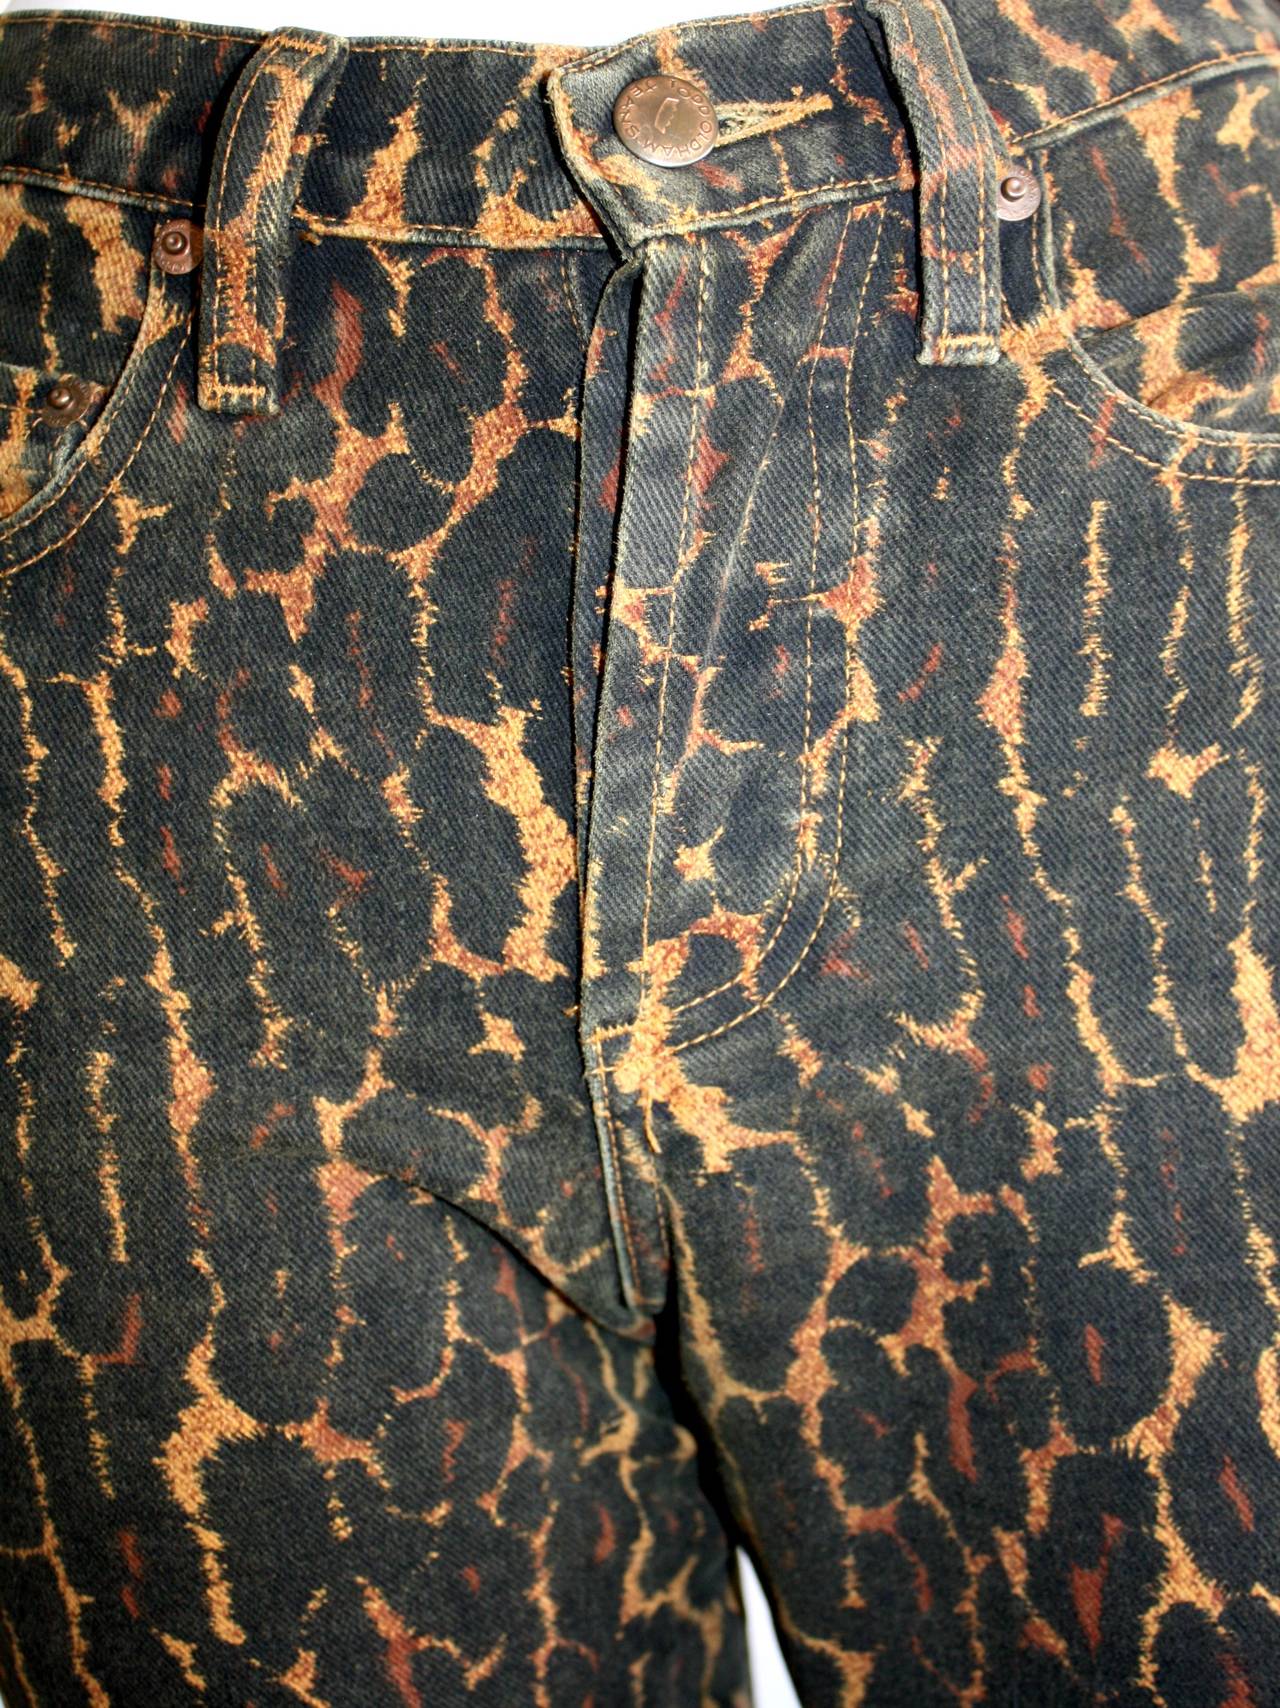 Good vintage Todd Oldham pieces are hard to come by! These 1990s leopard jeans by Todd Oldham not only feature a chic print, but have a great fit, too! Slim/Skinny modern fit. Button fly, with pockets in front and rear. Minor wear to leather label